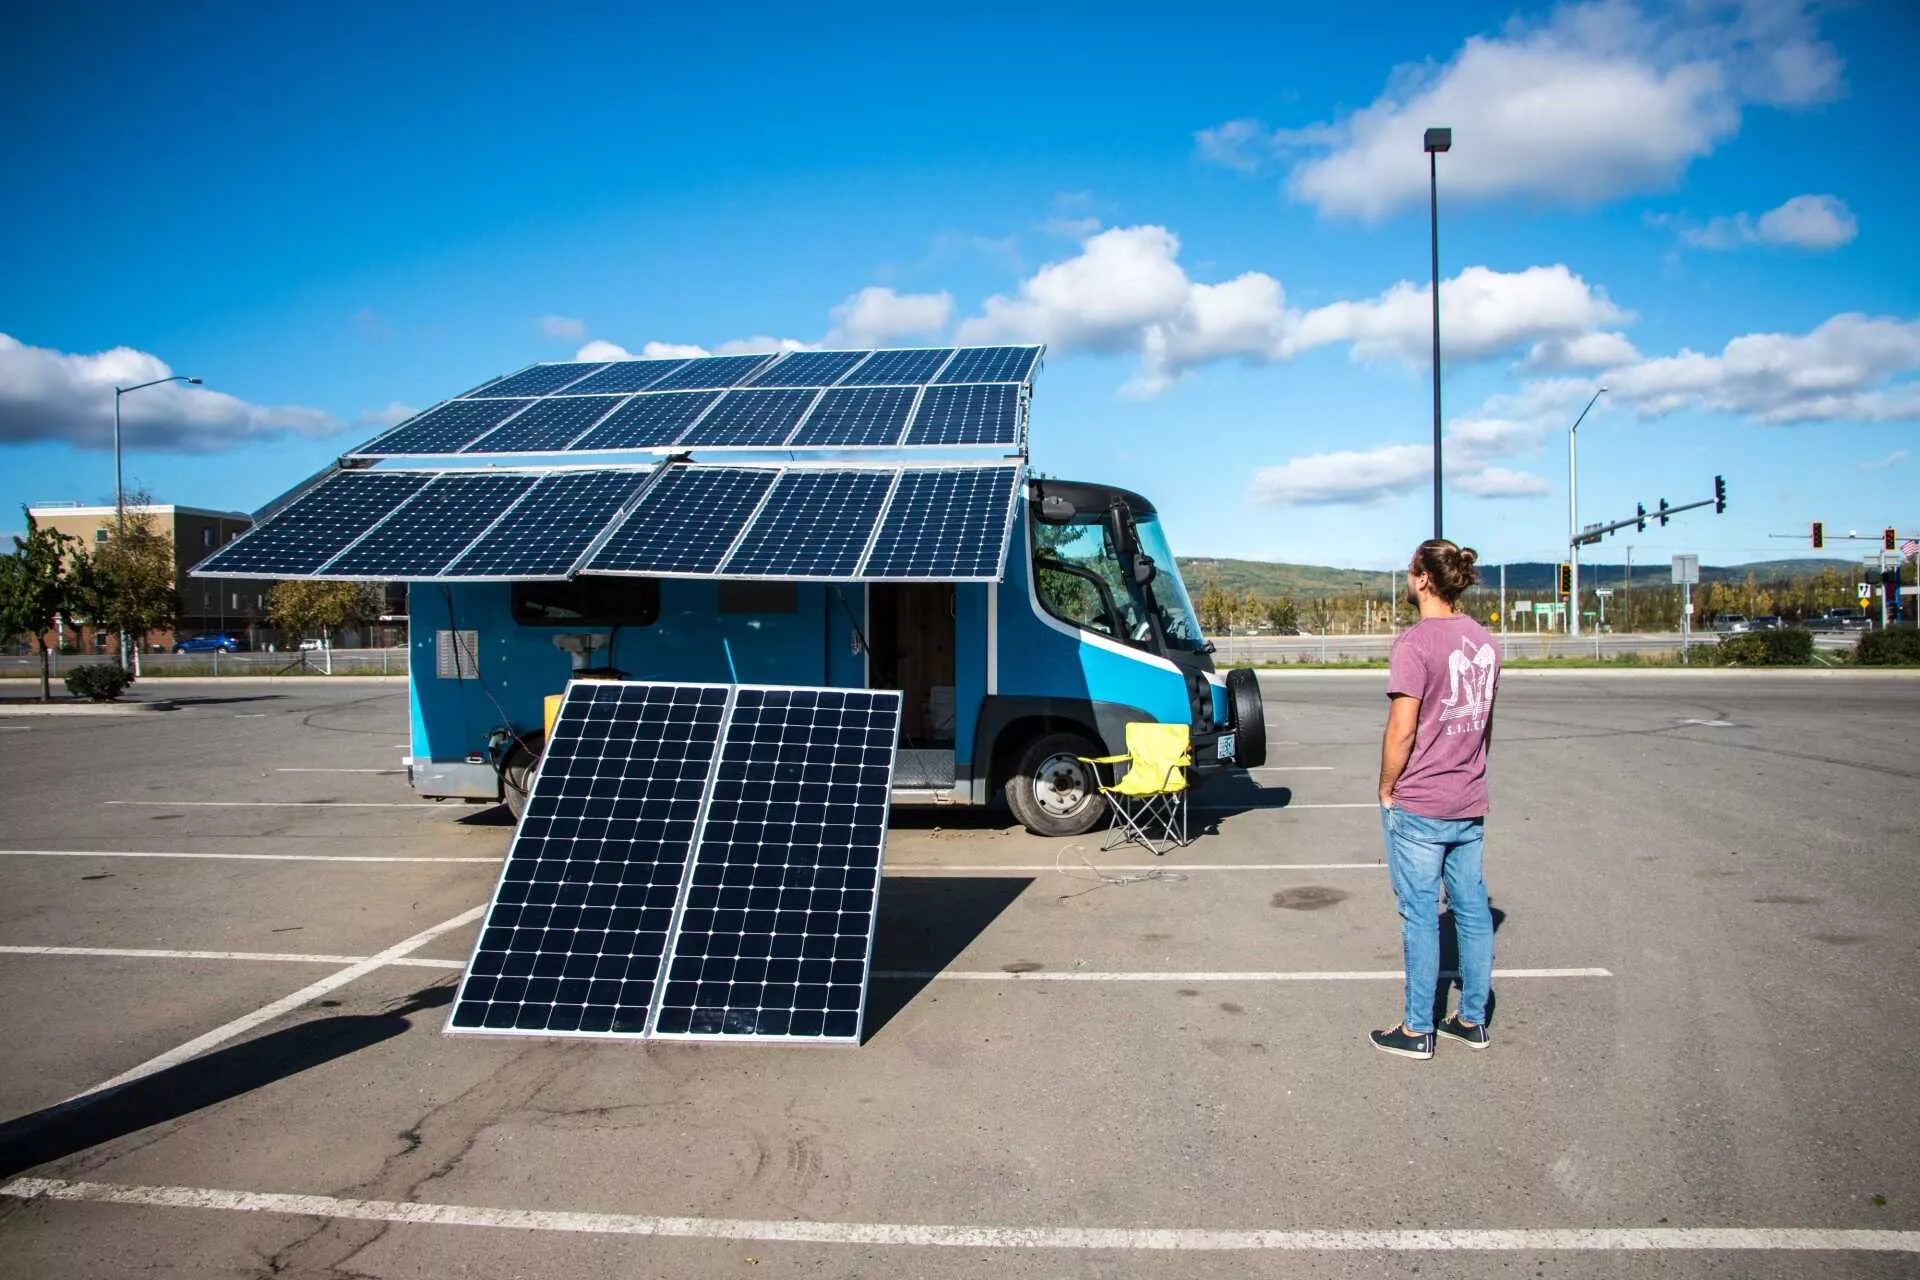 Route Del Sol is driving a 100% electric, solar powered camper van thanks to SunPower solar technology supported by Galt Energy.